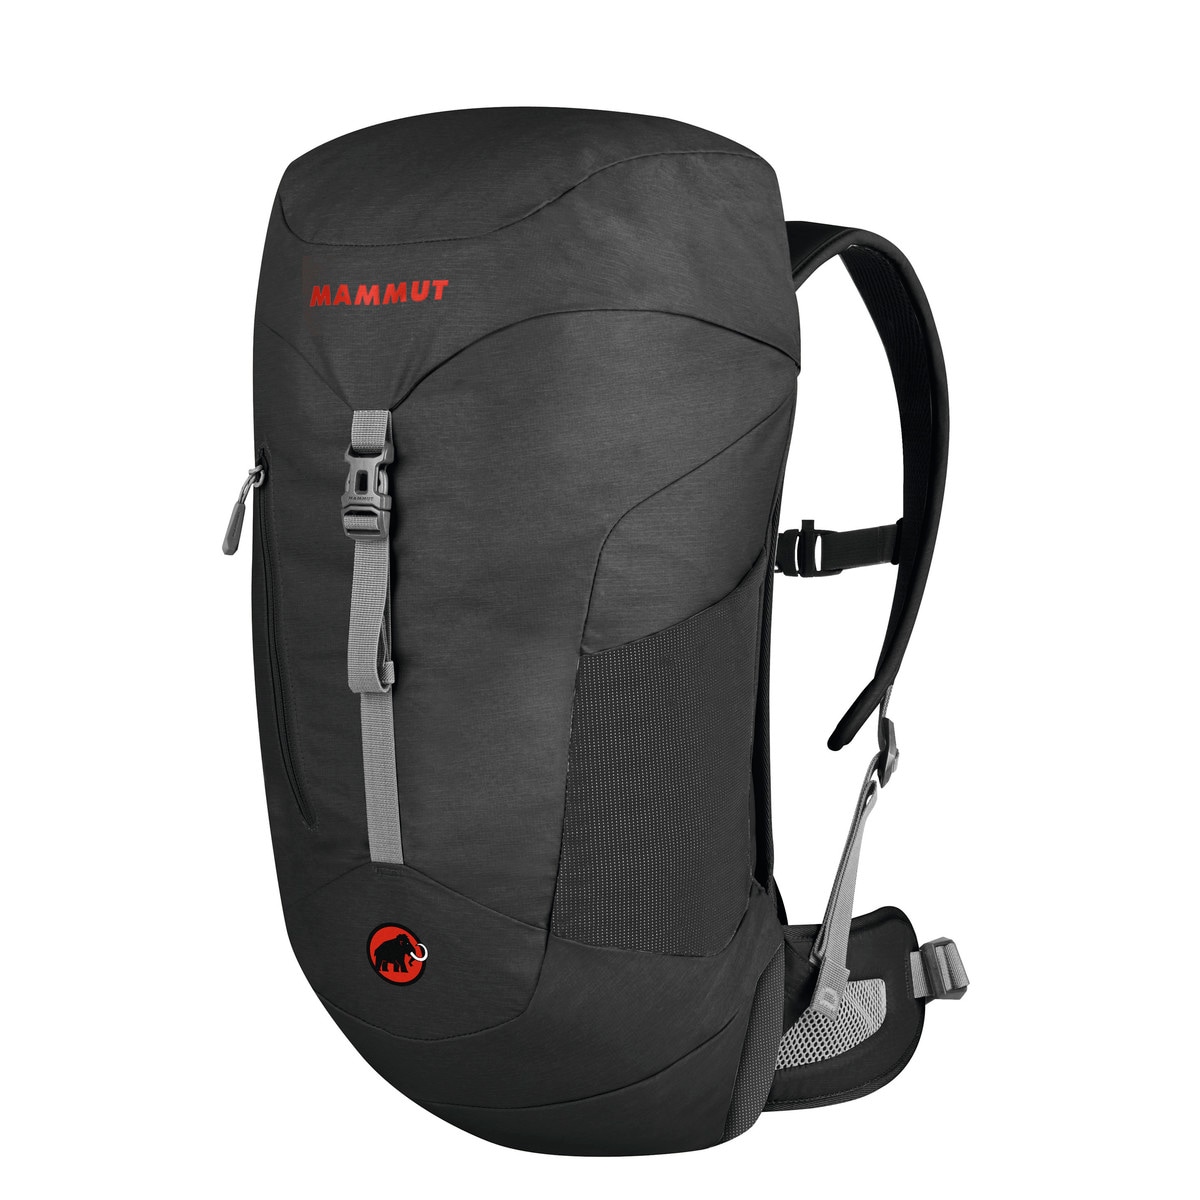 Mammut Creon Tour Backpack -